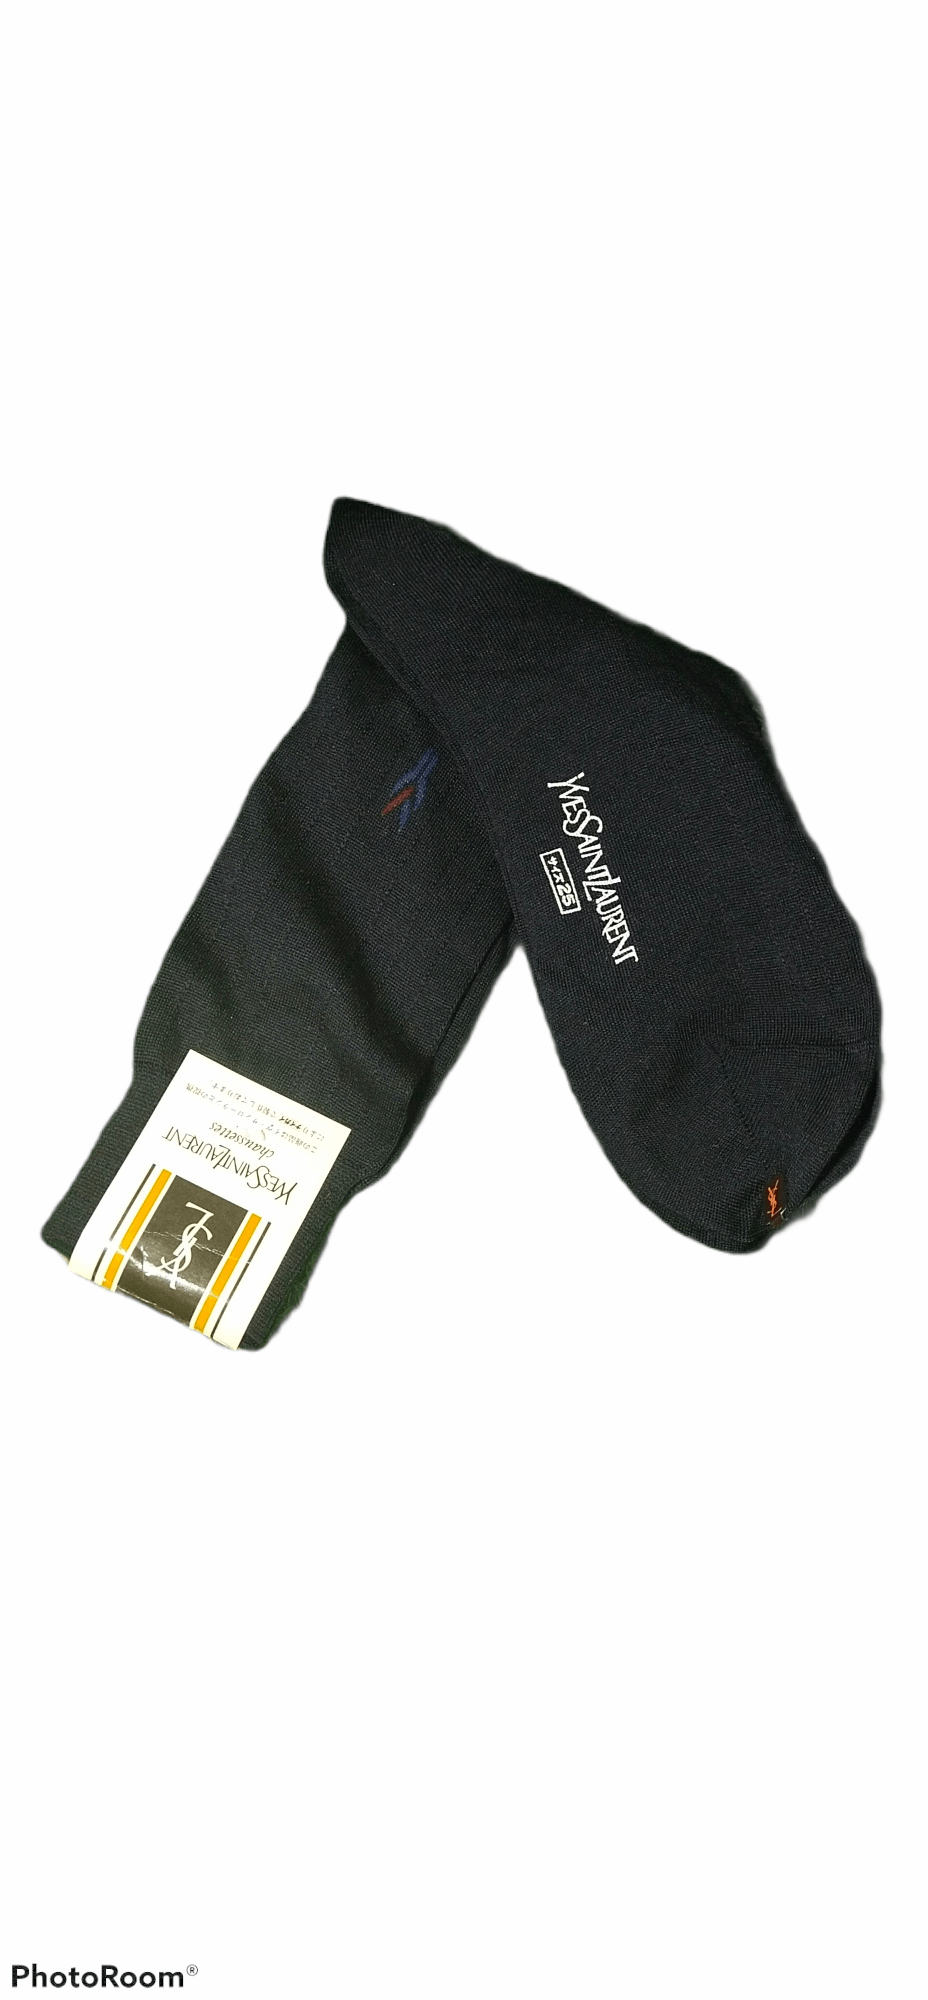 Yves Saint Laurent Ysl Sock Size ONE SIZE - 3 Preview